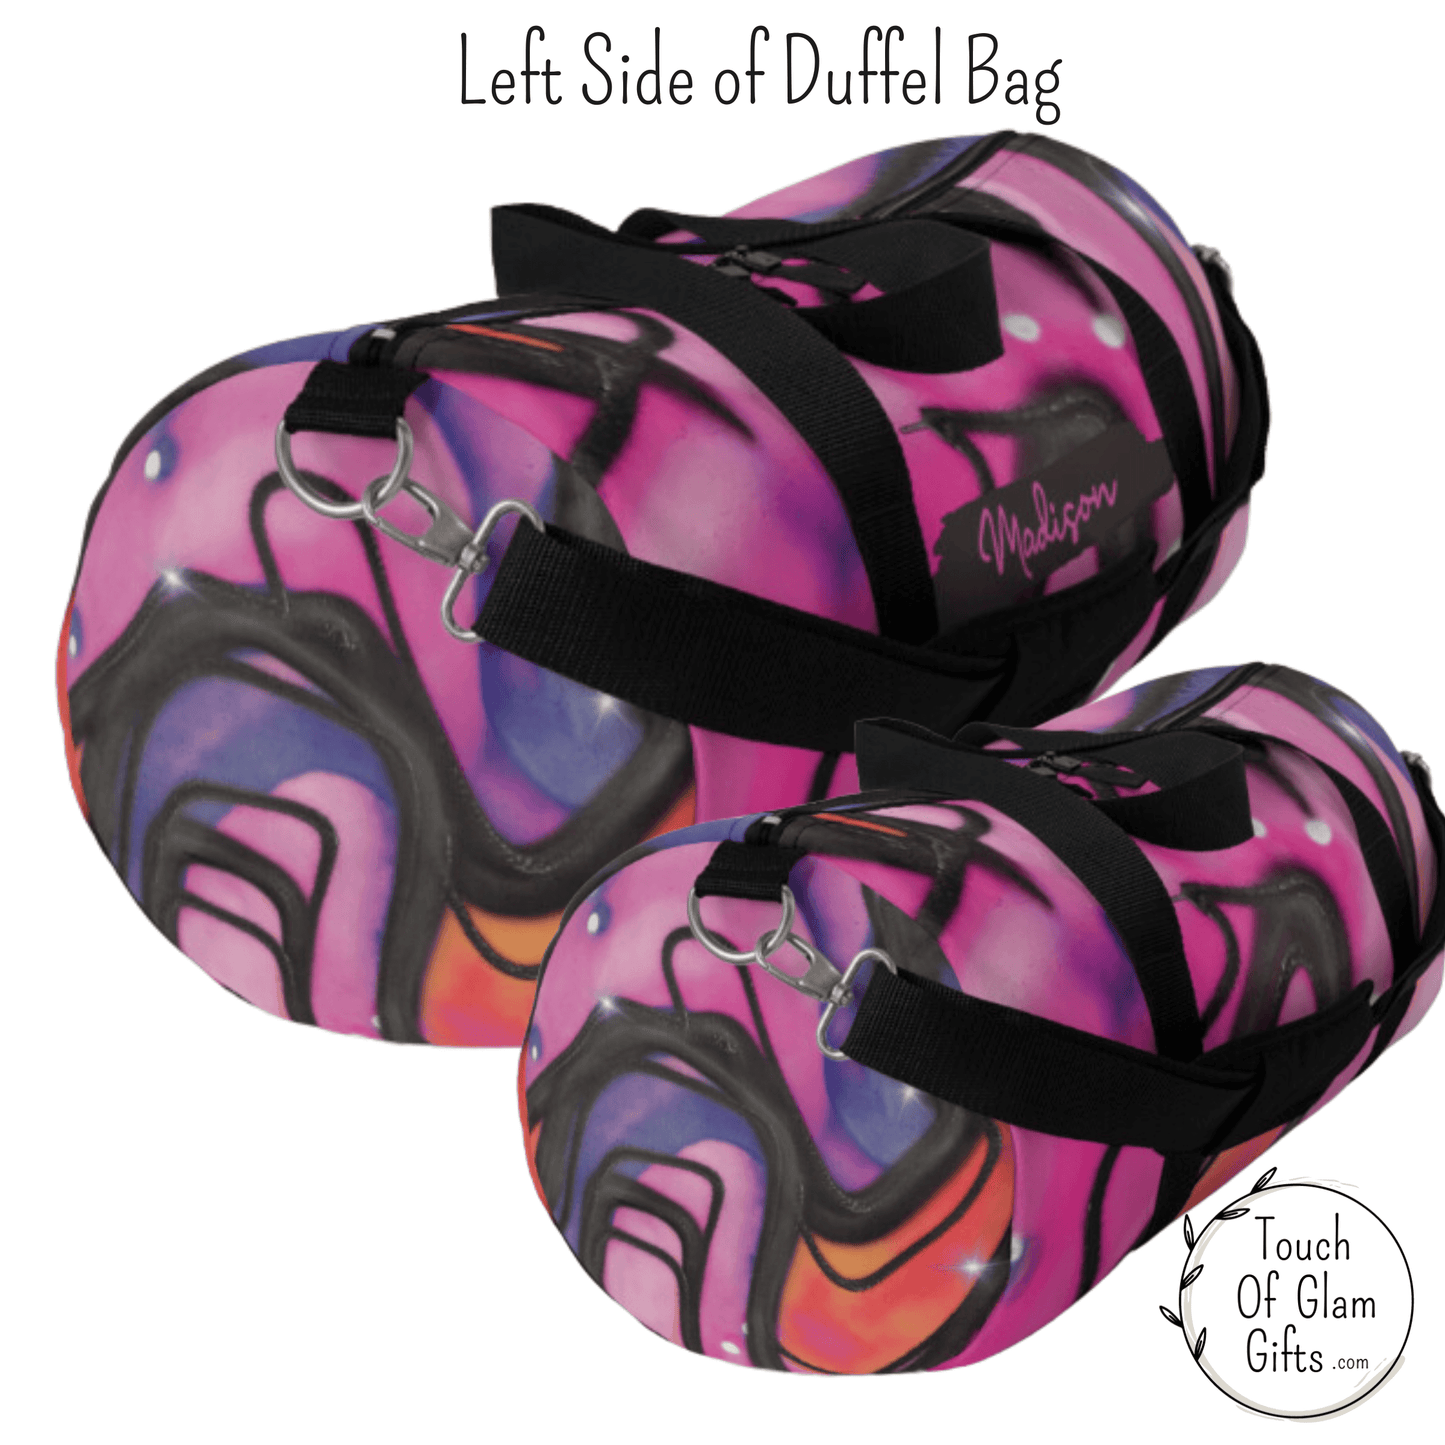 The left side of the pink retro duffel bag shows the colorful print and metal clasps for the shoulder strap. This duffel bag has black handles also for easy carrying ability. The large bag shows a monogram name and the small bag is plain.